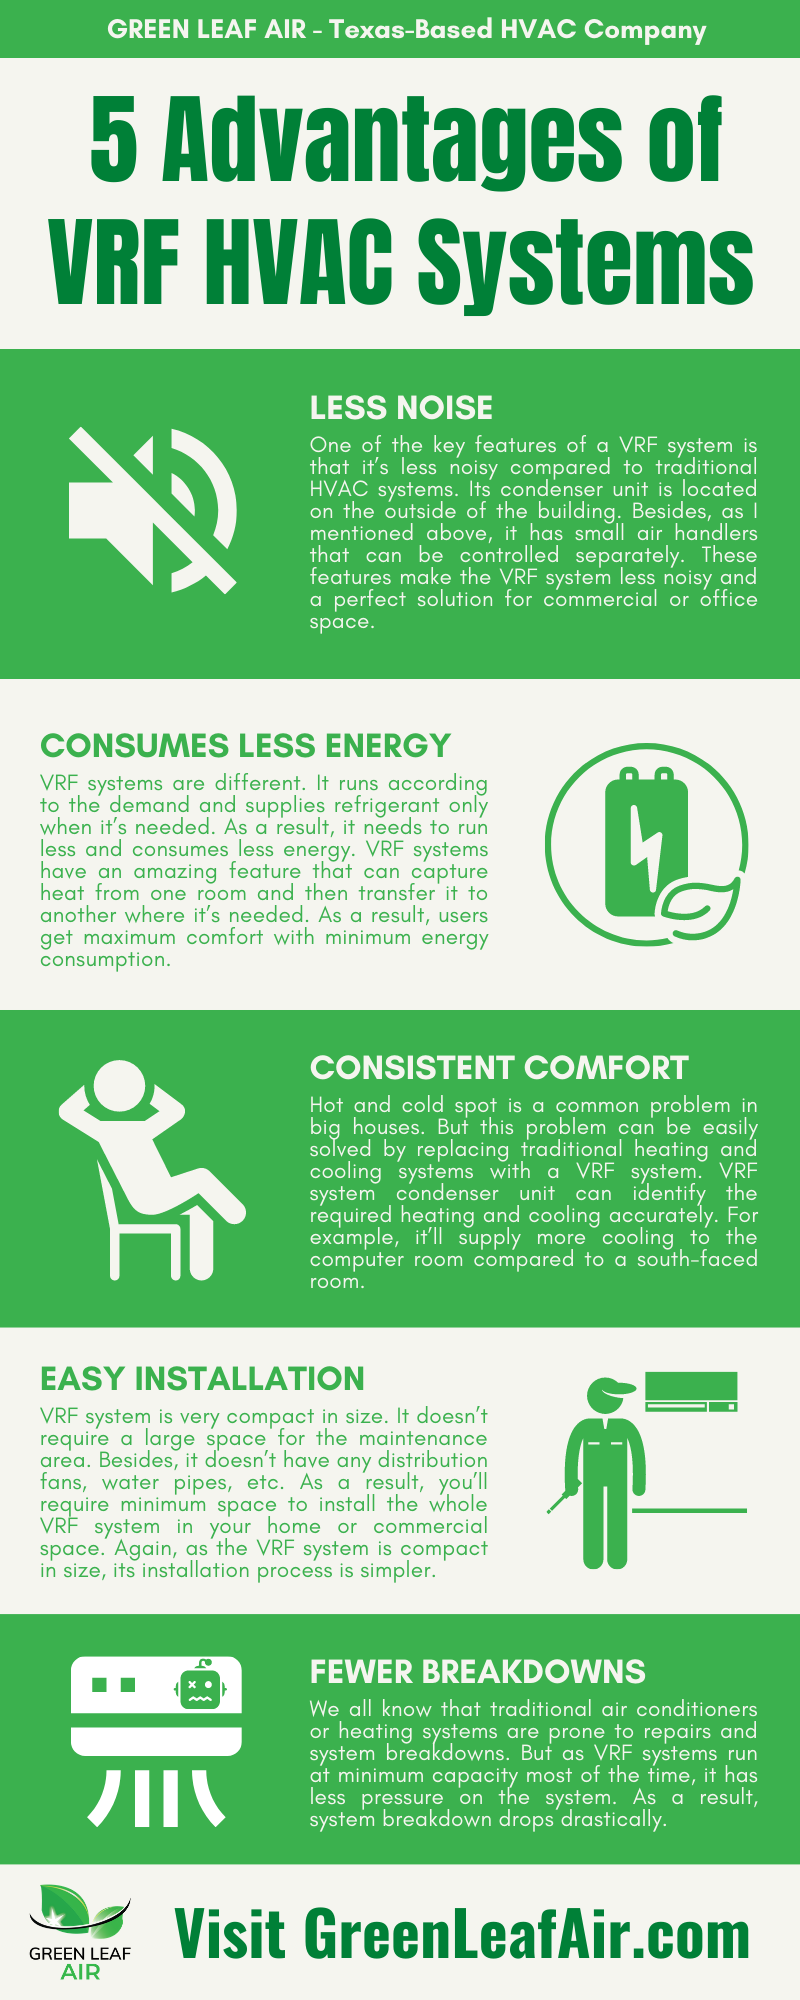 5 Advantages of VRF HVAC Systems